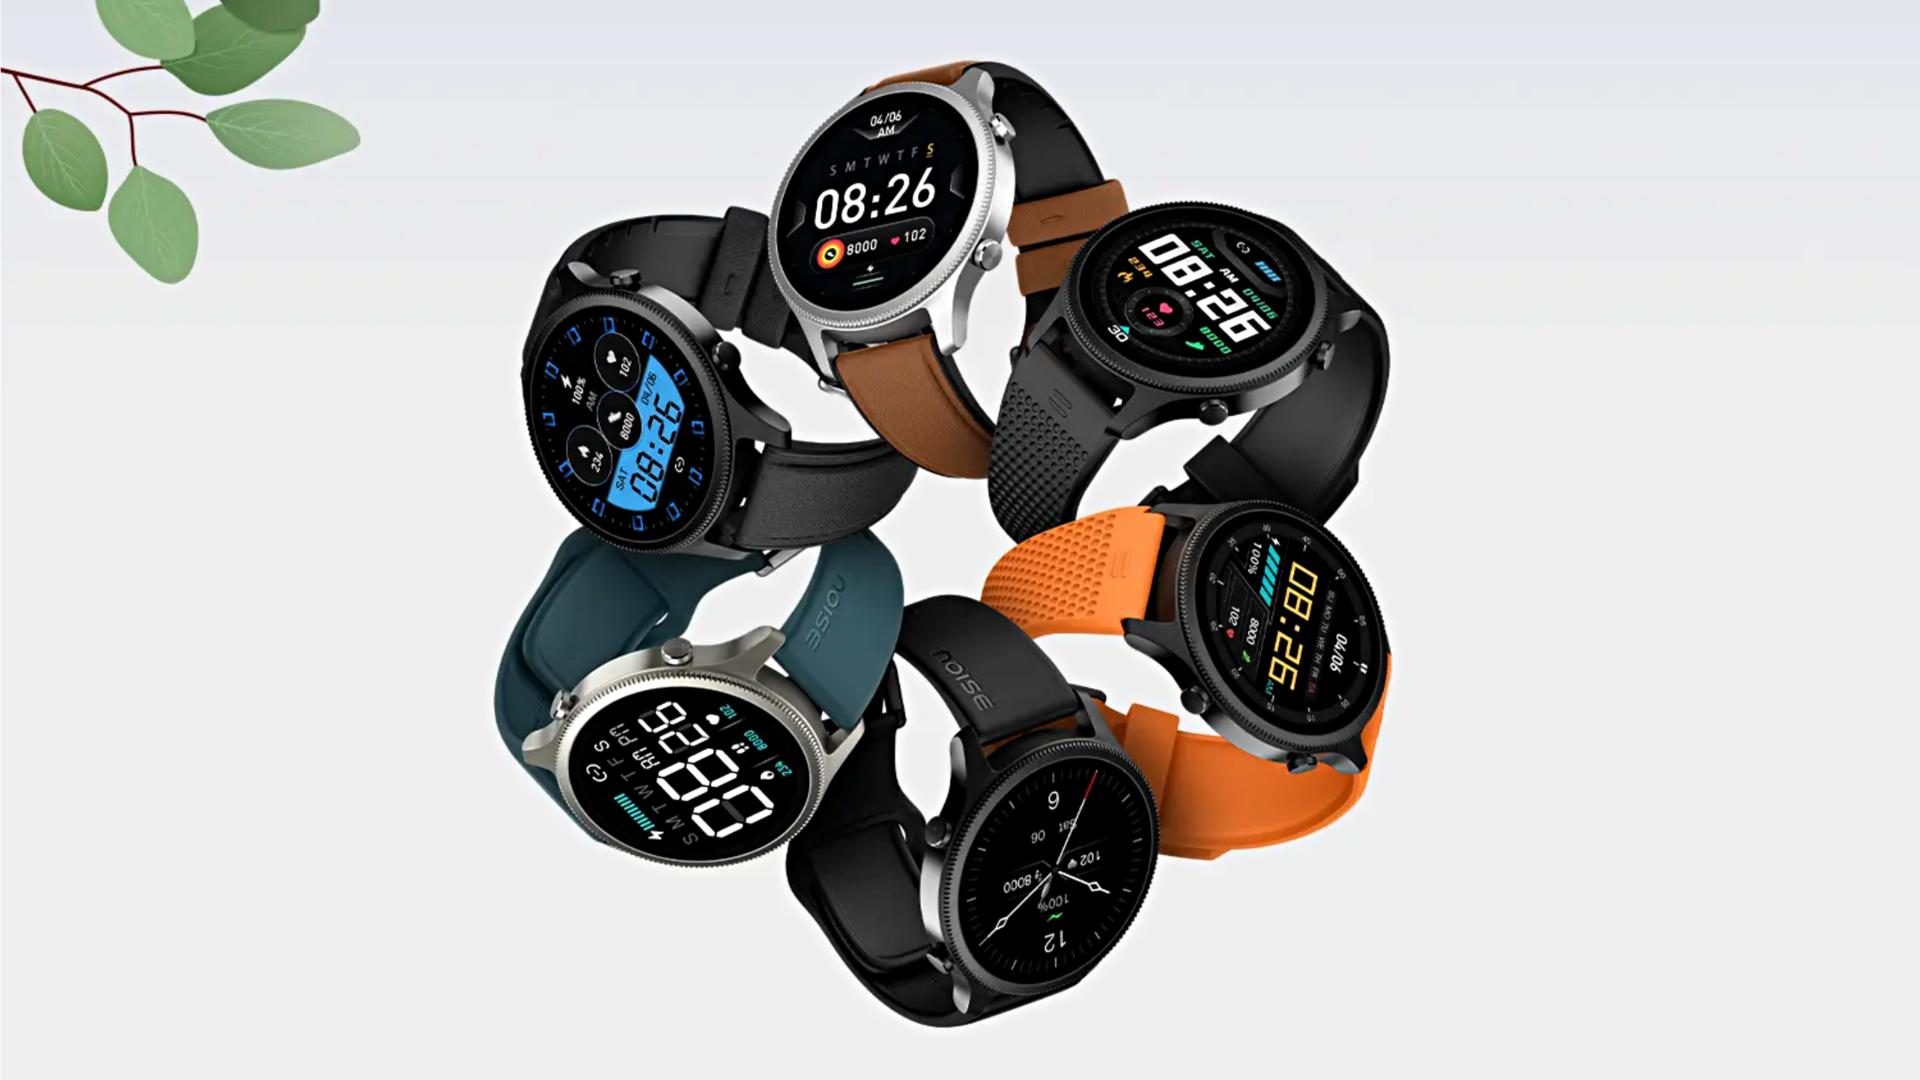 NoiseFit Halo smartwatch goes official in India at Rs. 4,000